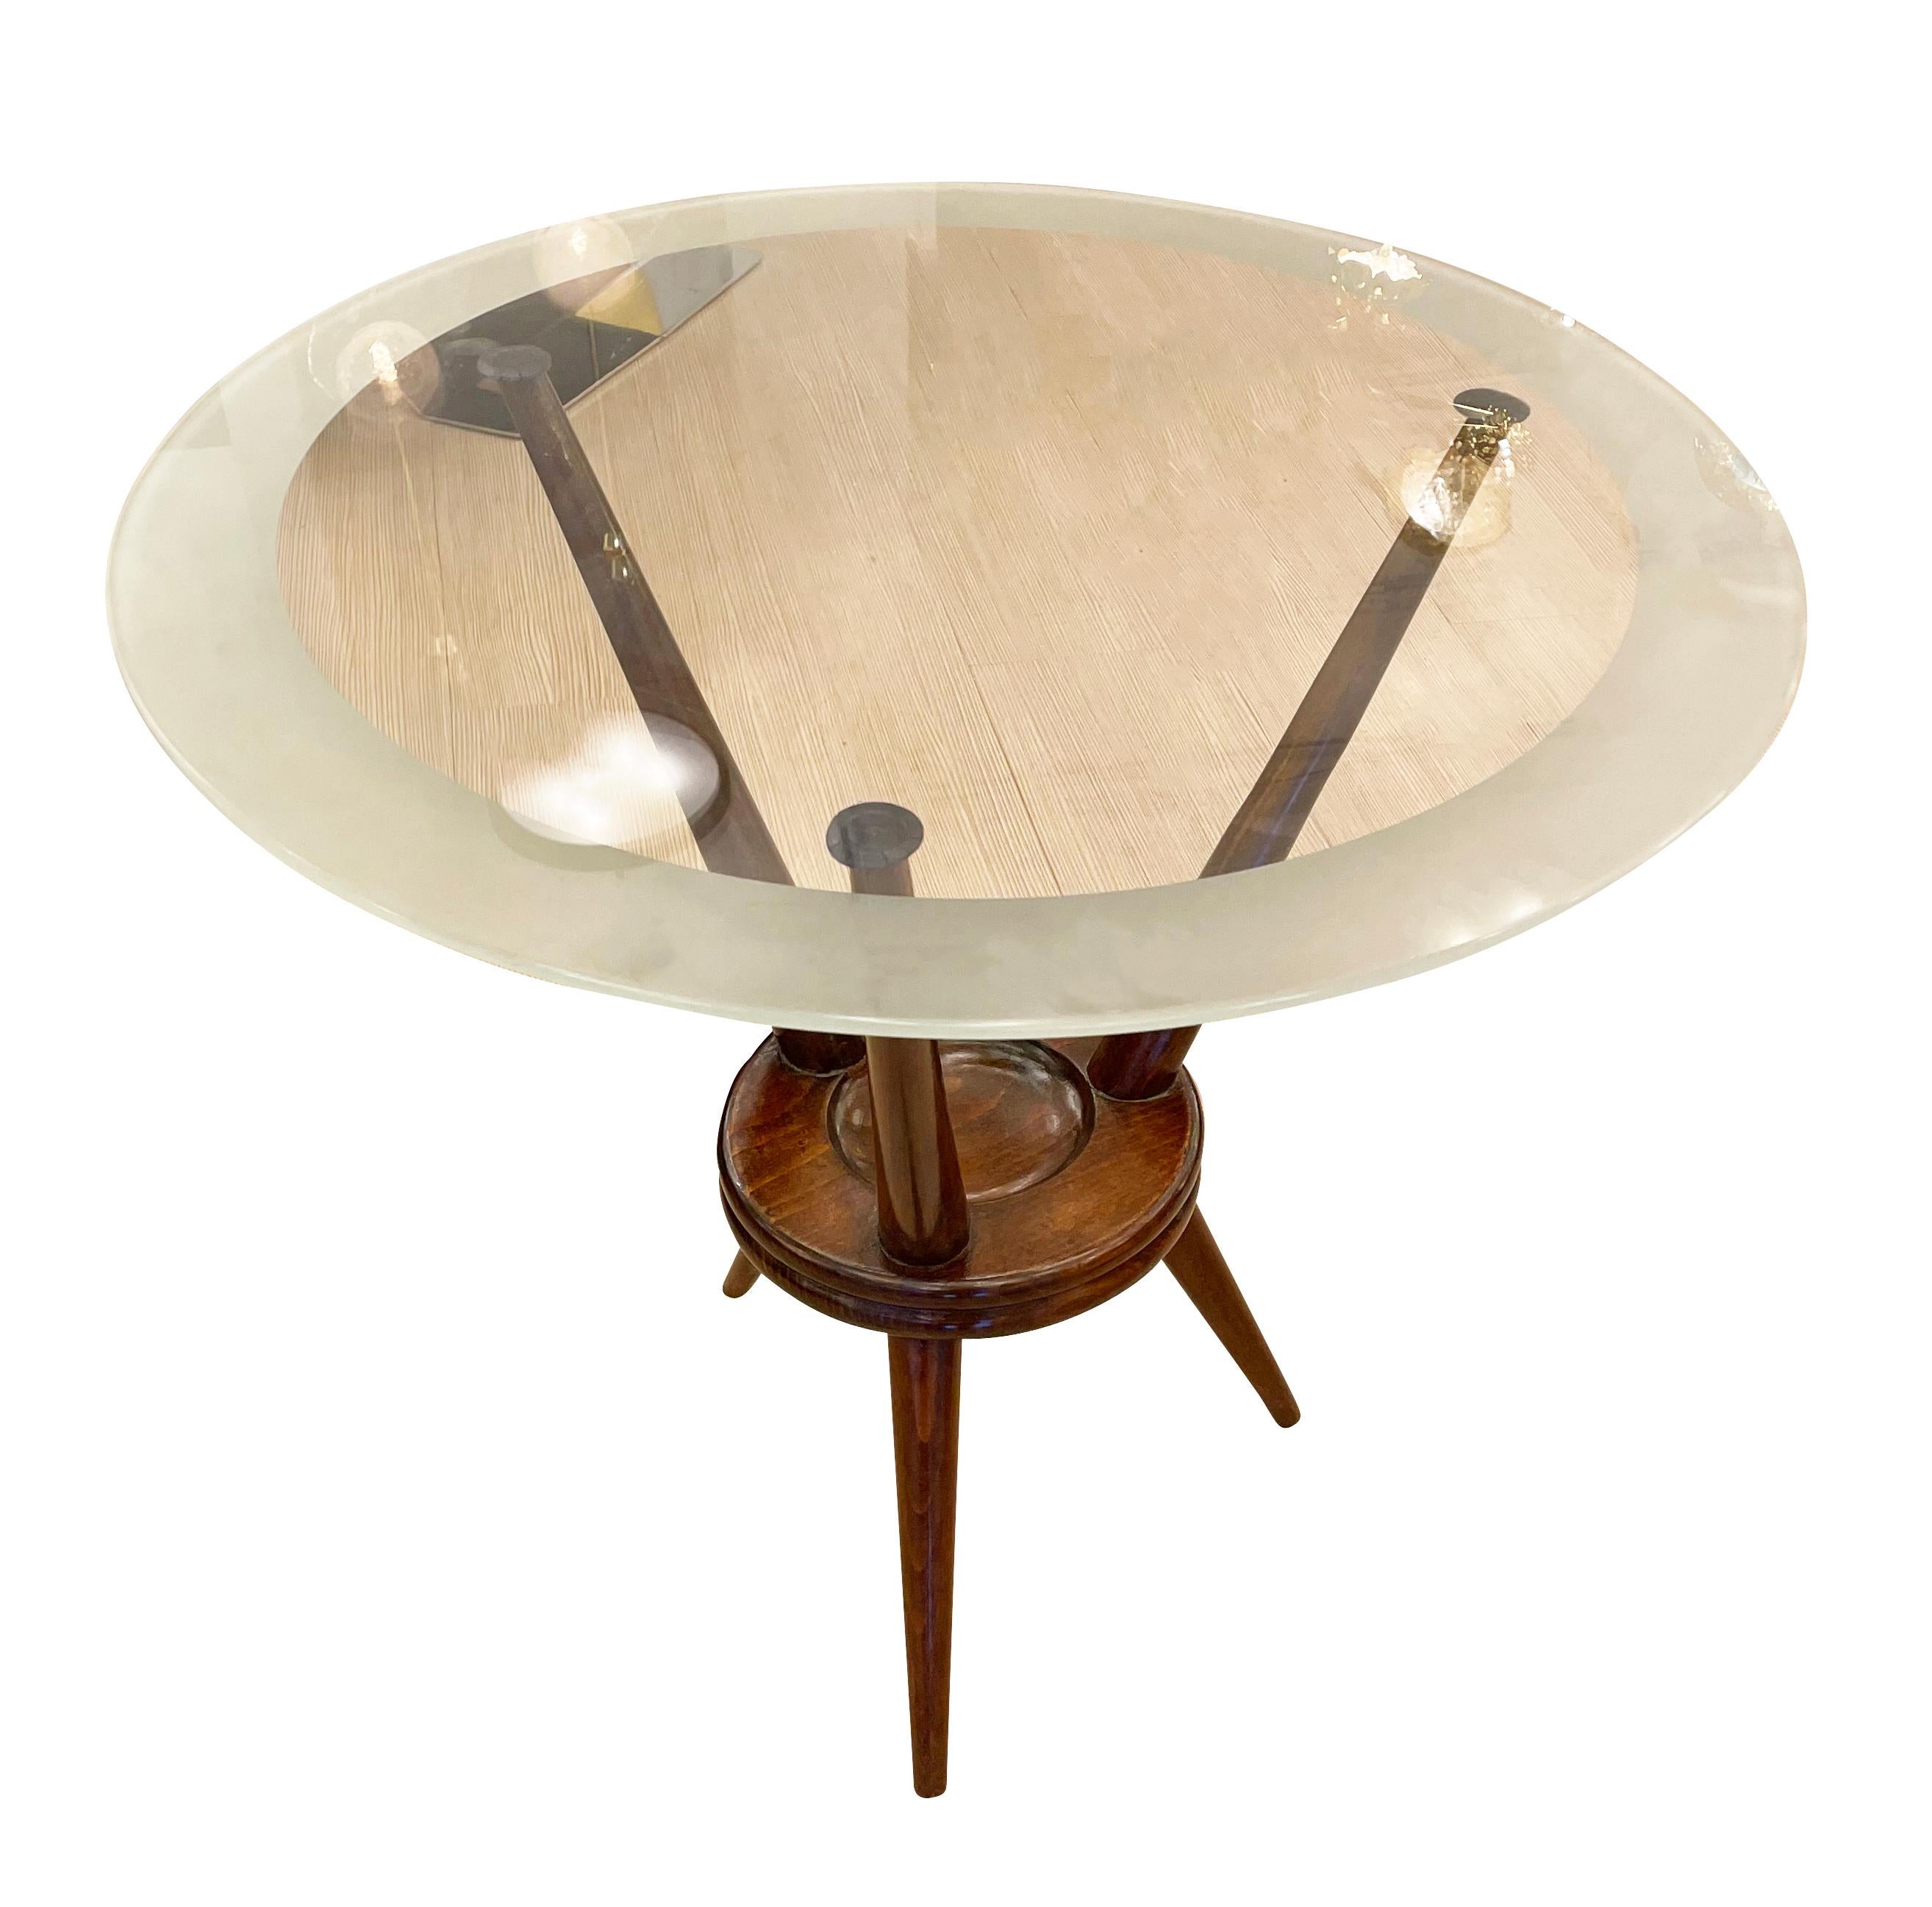 Italian Mid-Century tripod side table. Wood framing and glass top with a frosted edging.

Condition: Excellent vintage condition, minor wear consistent with age and use.

Measures: Diameter: 21.75”

Height: 20.25”.

 